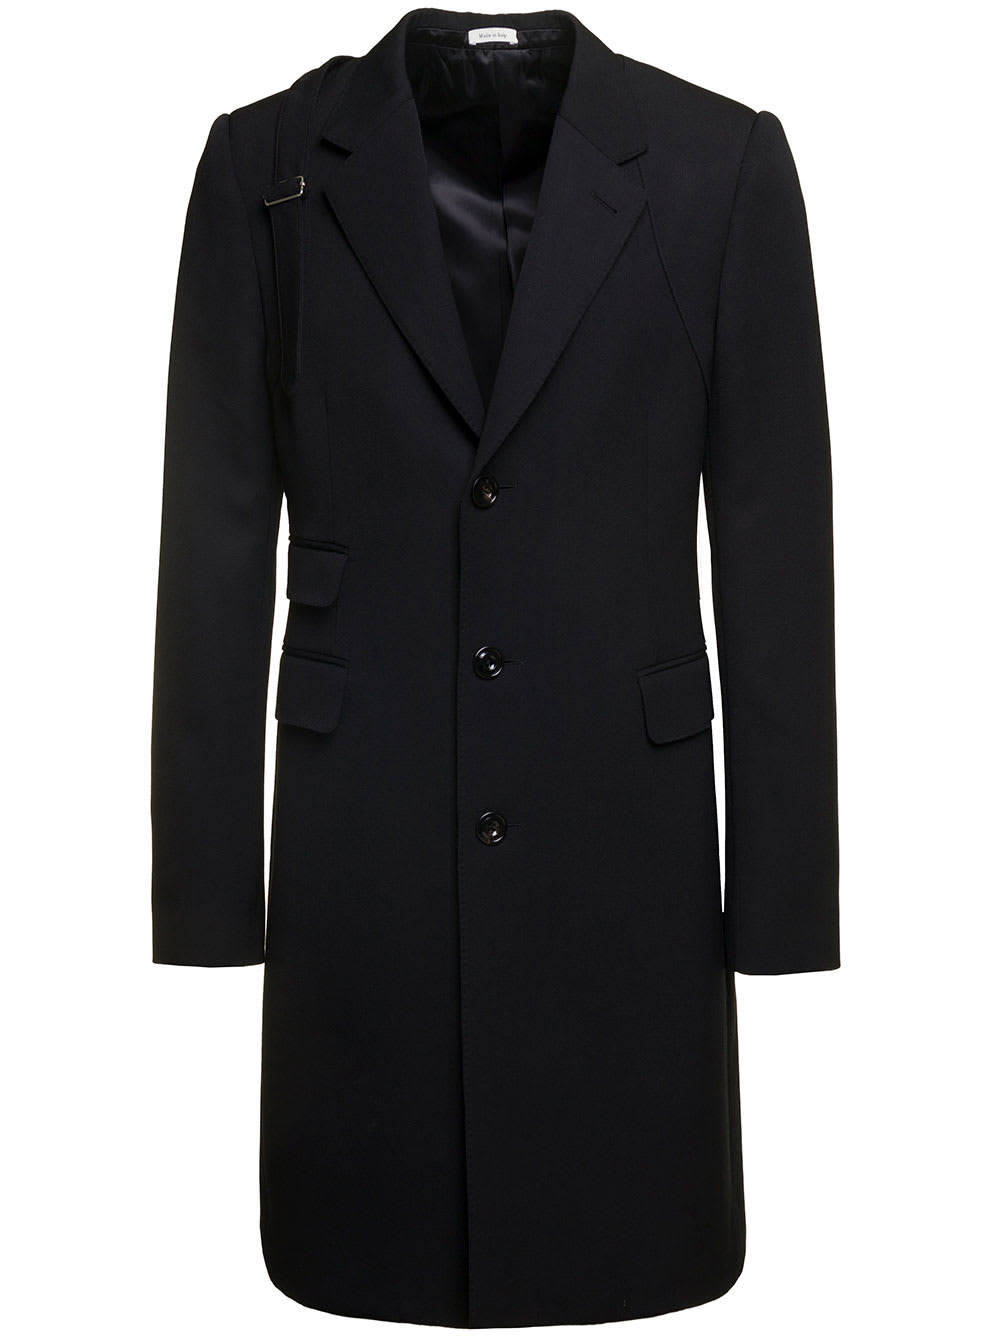 ALEXANDER MCQUEEN BLACK SINGLE-BREASTED COAT WITH HARNESS DETAIL IN WOOL MAN